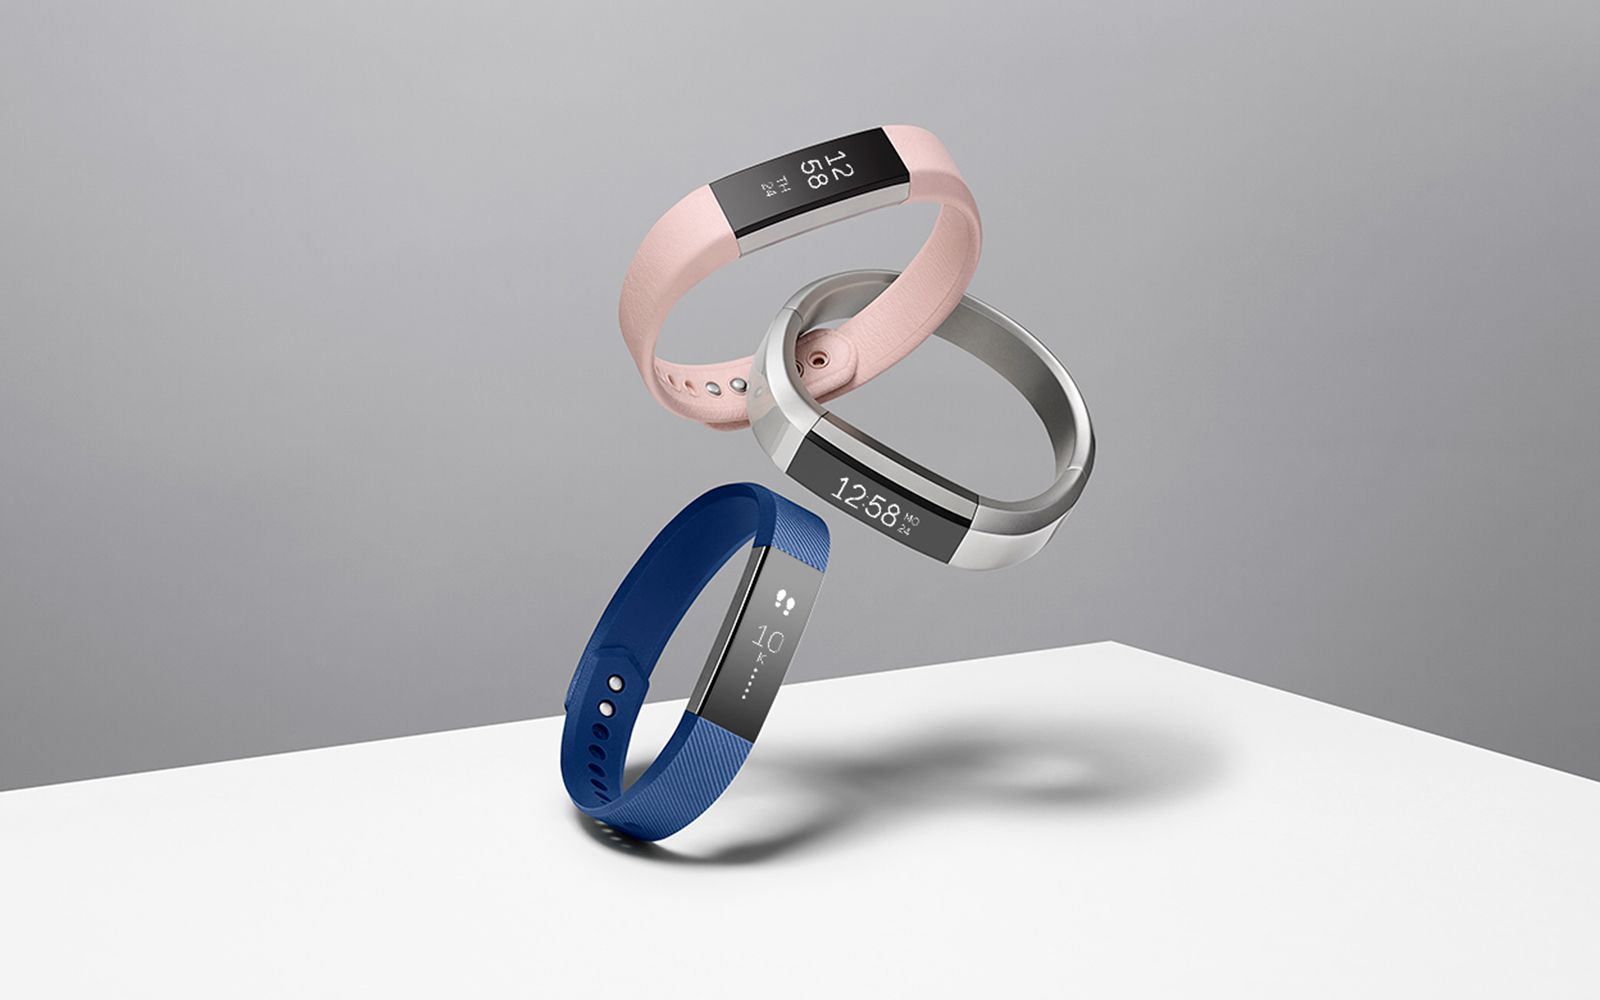 New Fitbit Alta brings personalisation options and reminder alerts